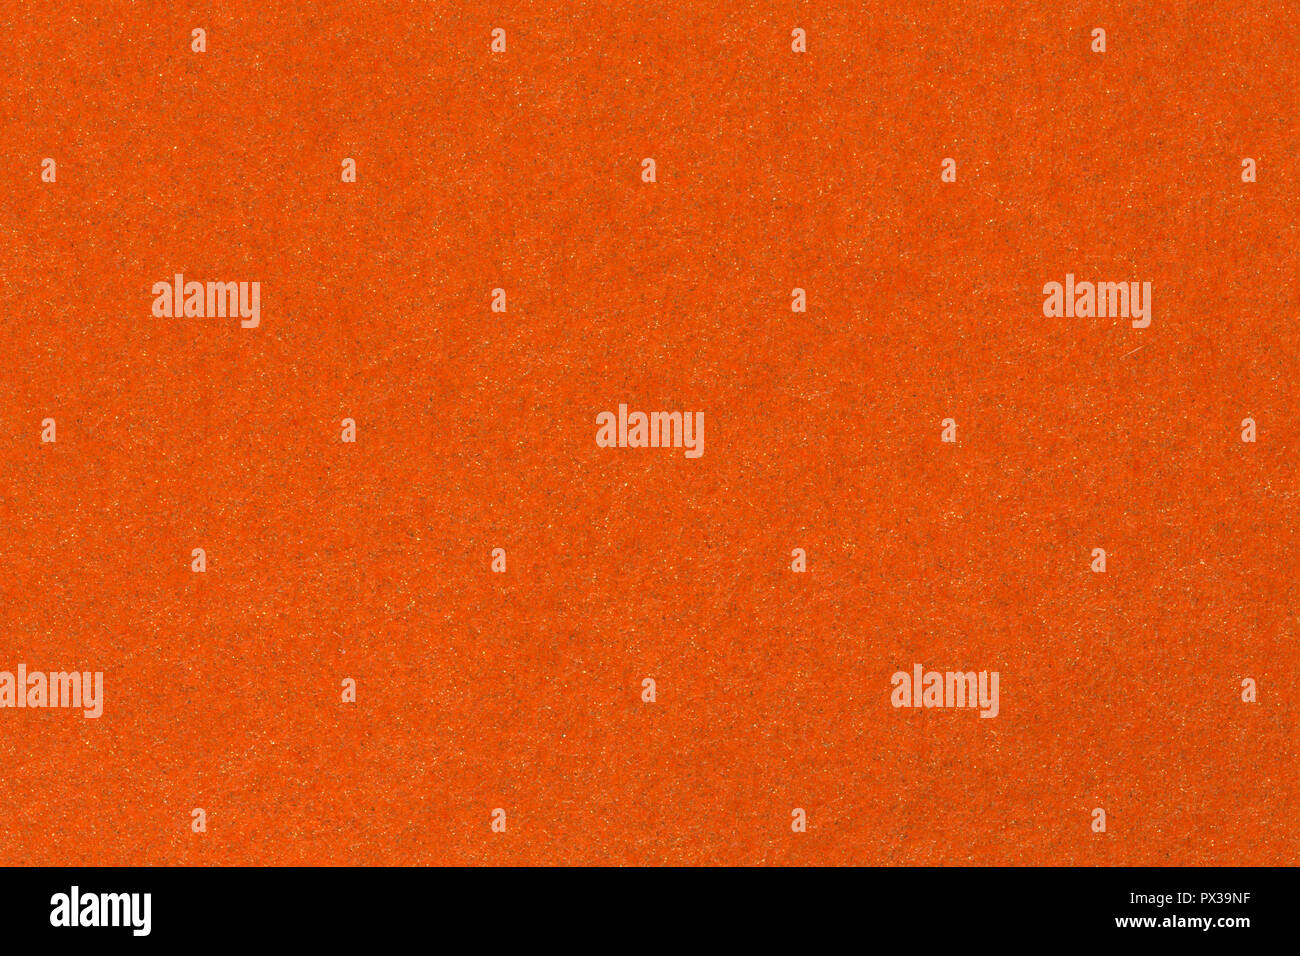 Orange paper texture and backgrounds. High quality paper texture. Stock Photo